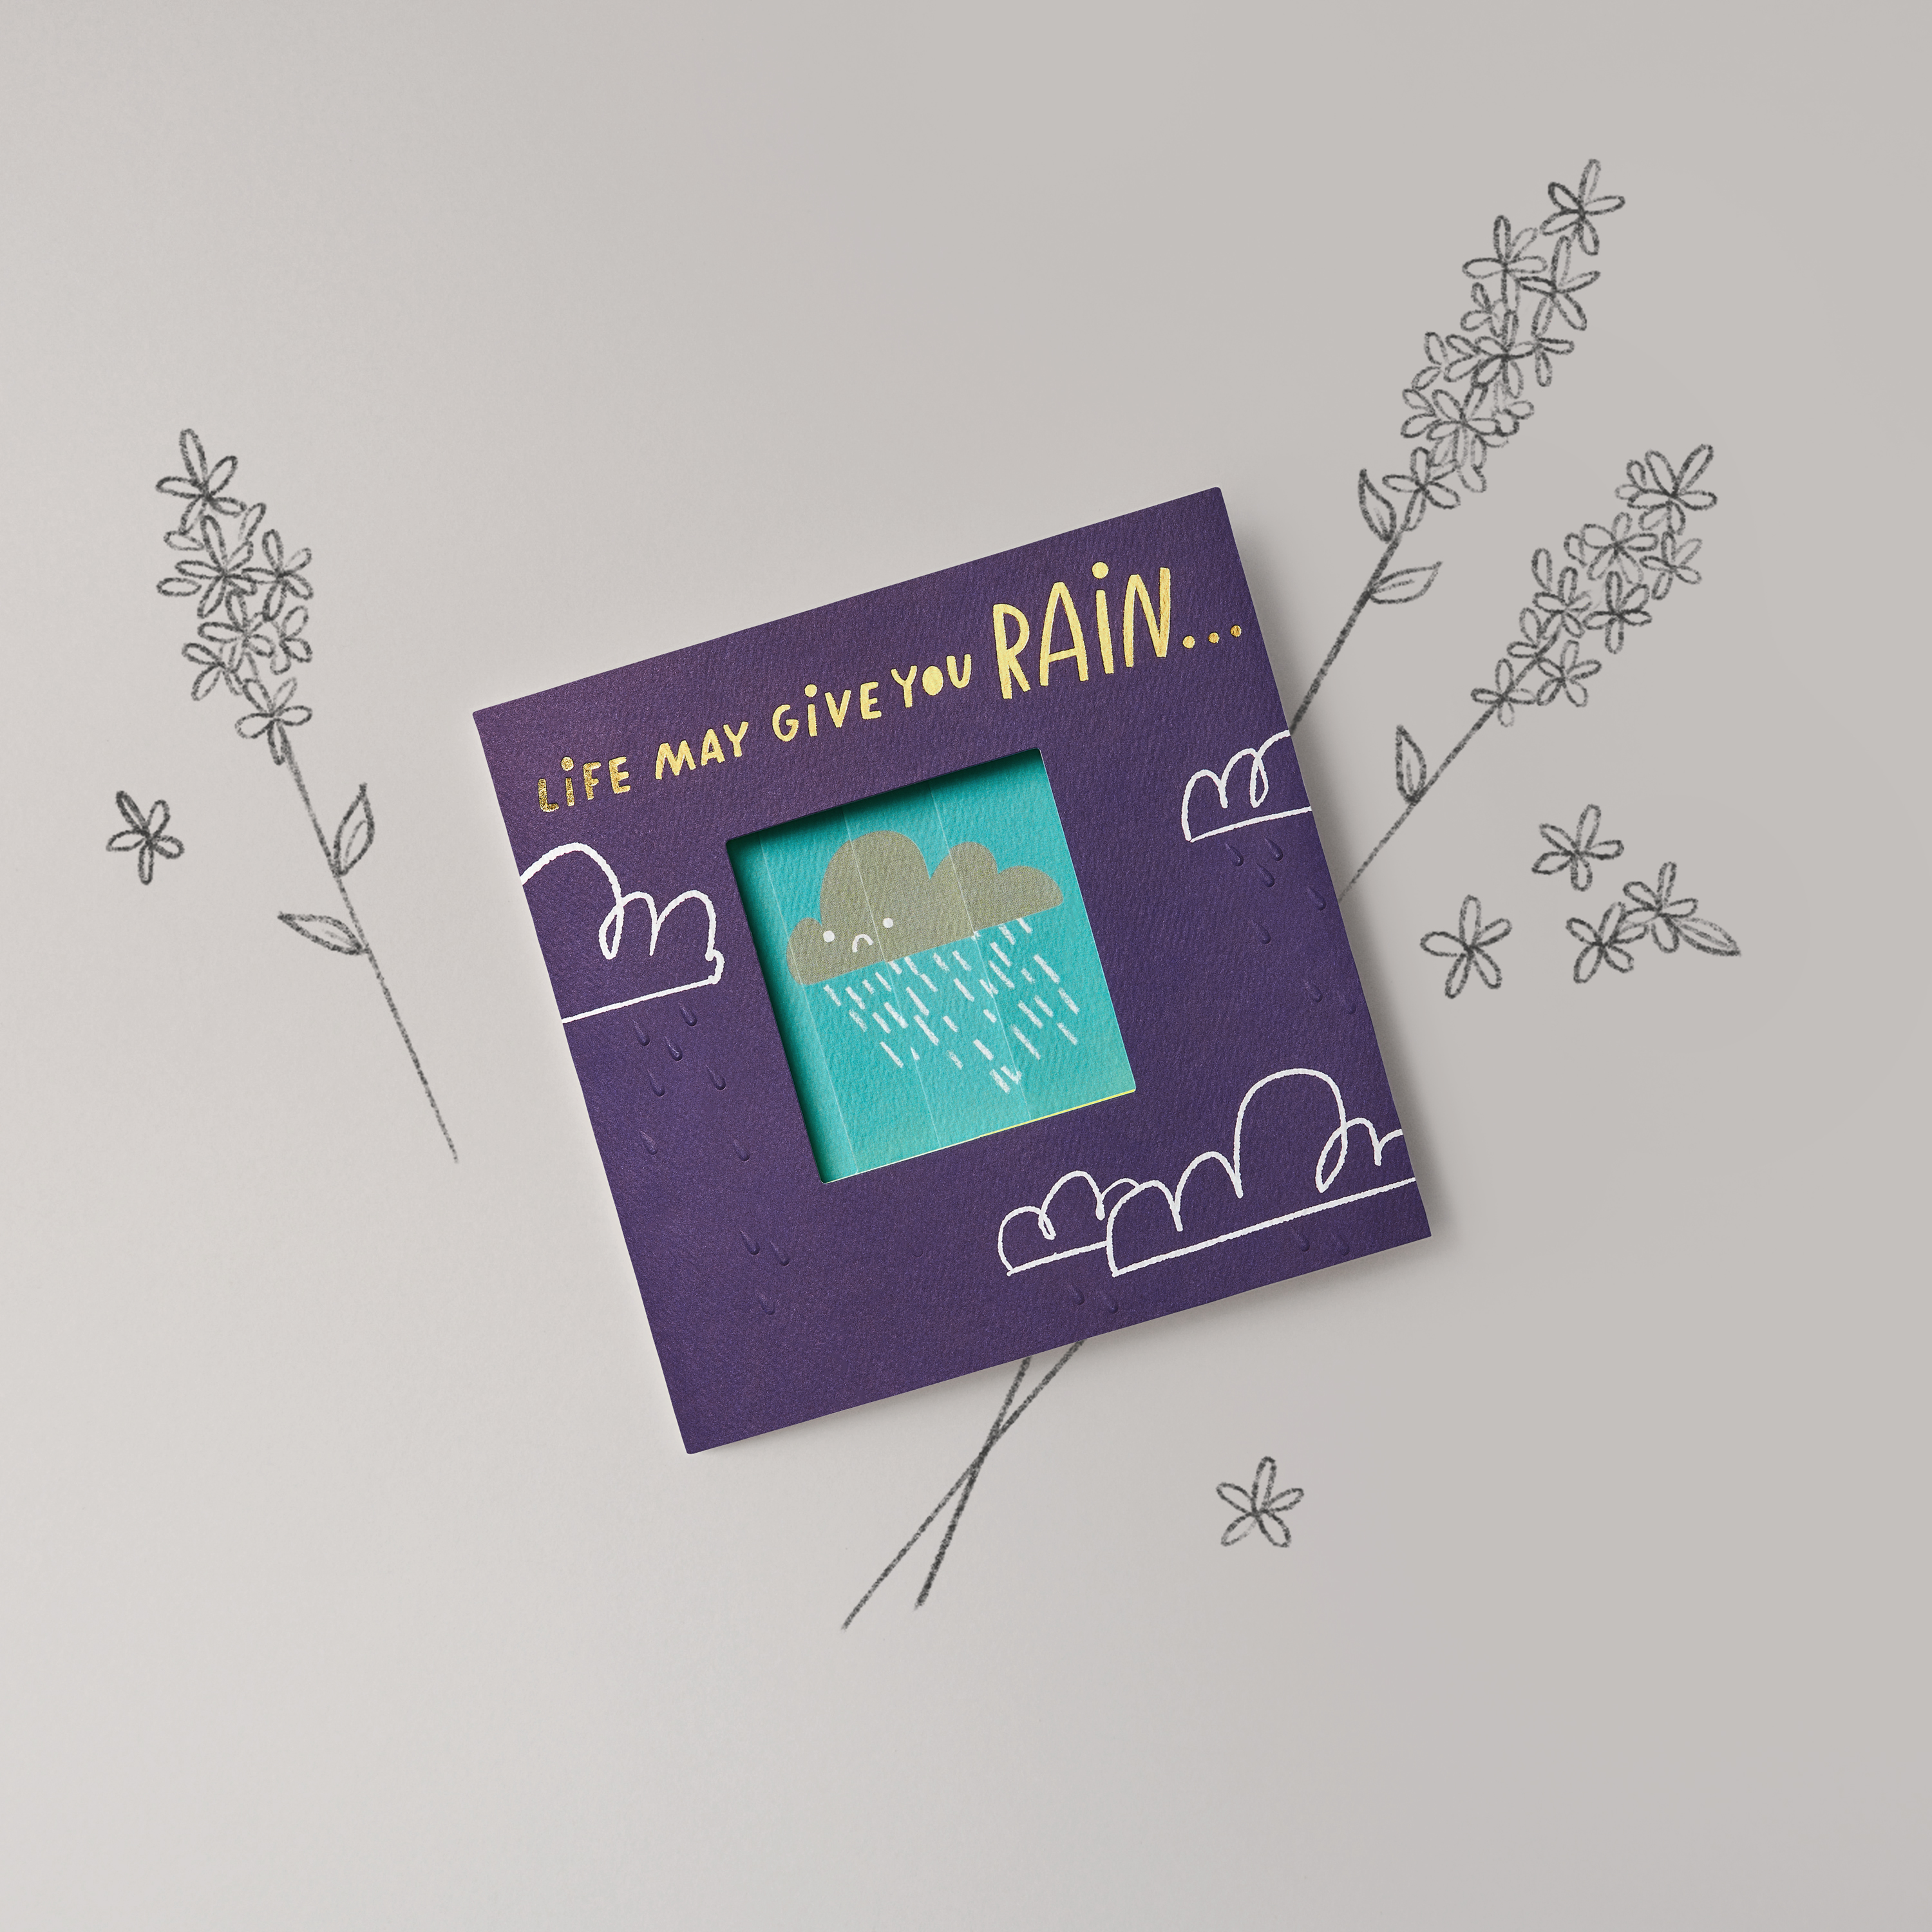 Rain Greeting Card - Support, Thinking of You, Encouragement image